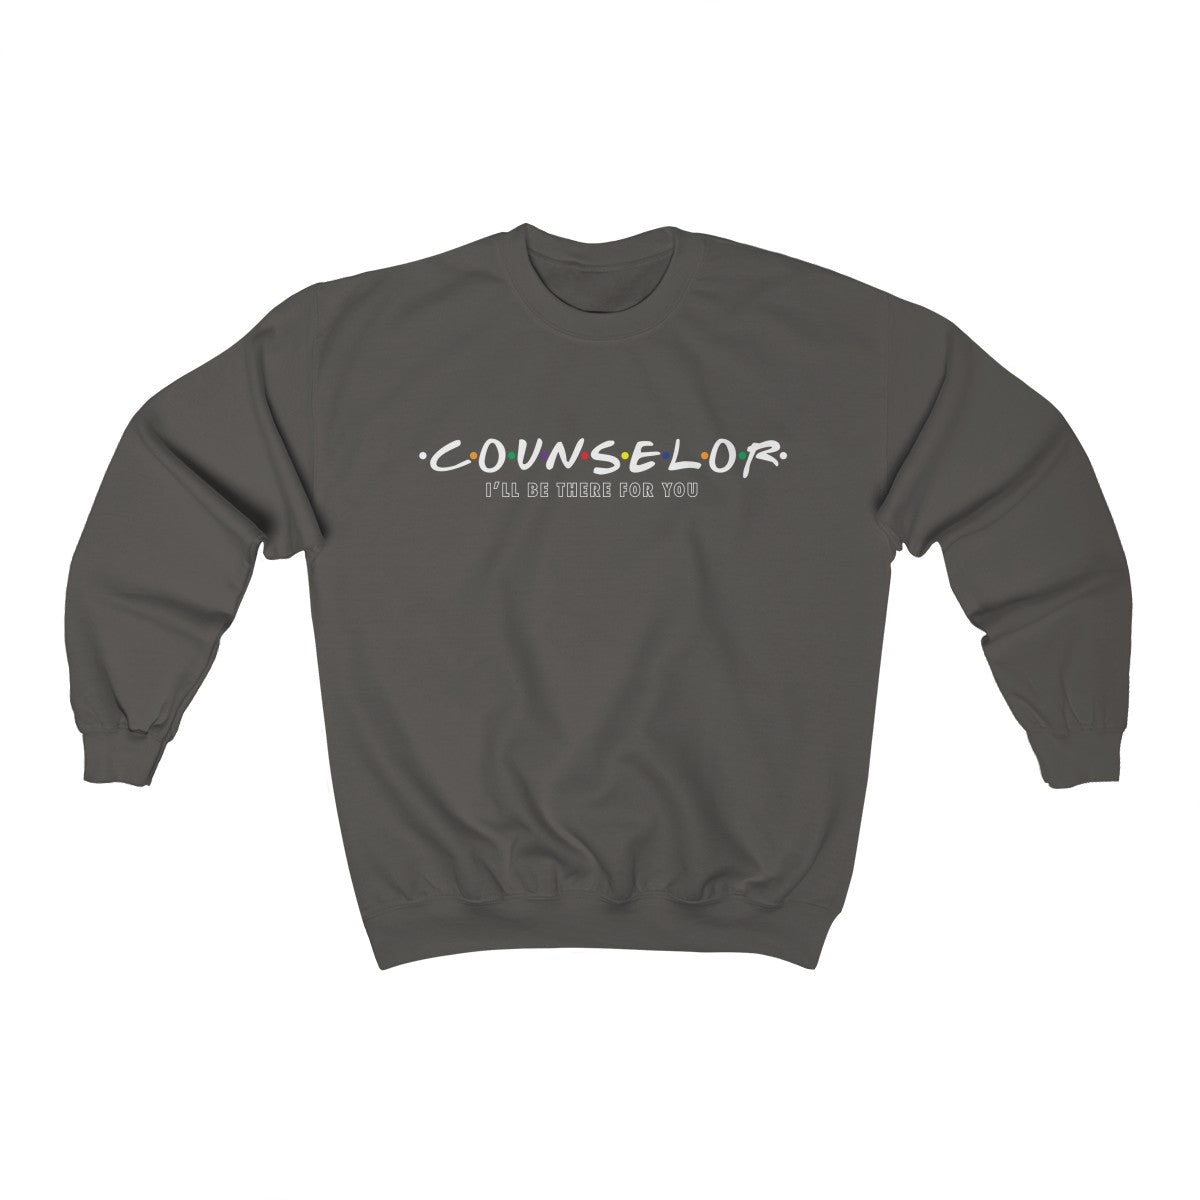 Counselor - I'll Be There For You - Crewneck Sweatshirt